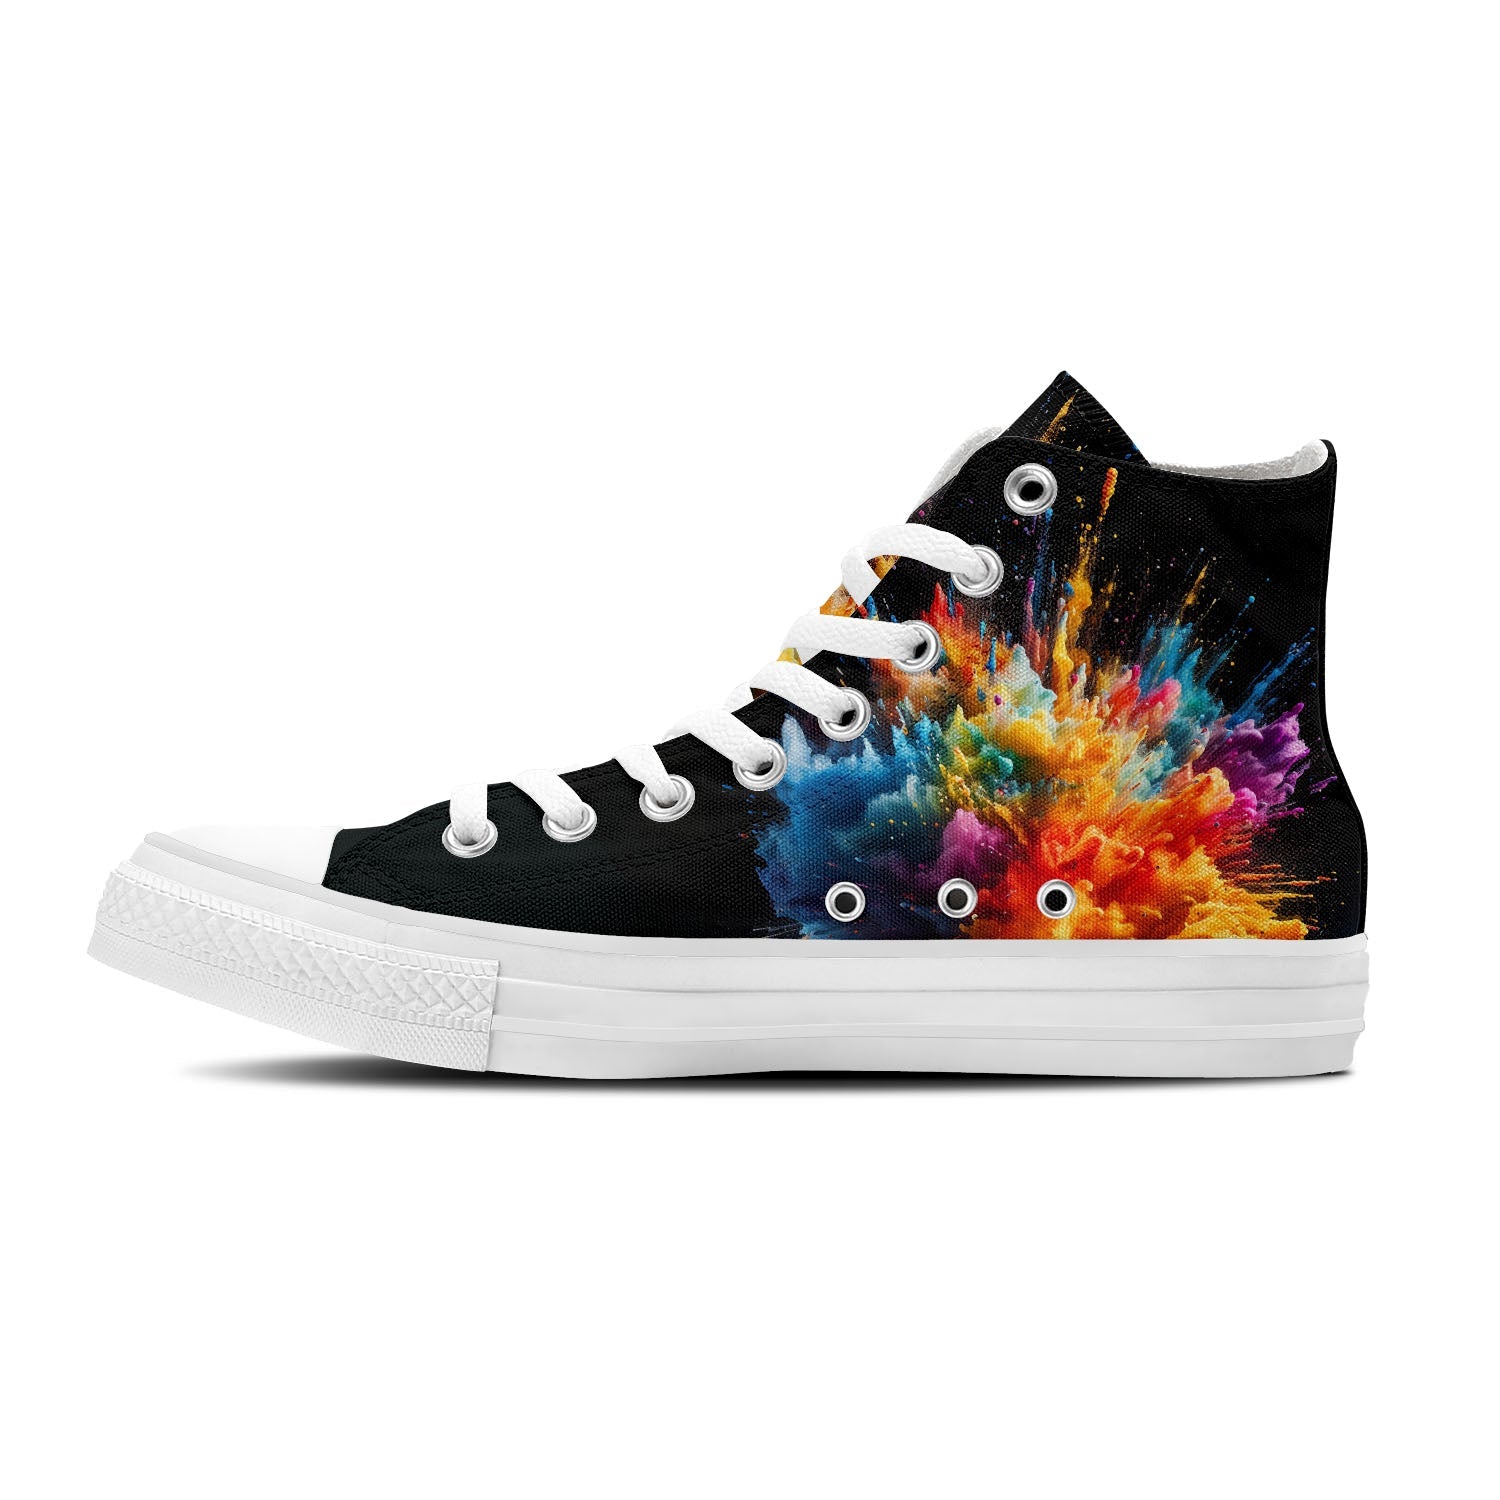 Fireworks Frenzy: Unisex Mid-Top Canvas Shoes - Step into a Burst of Color with Splash Paint Style Fireworks Prints for Men and Women